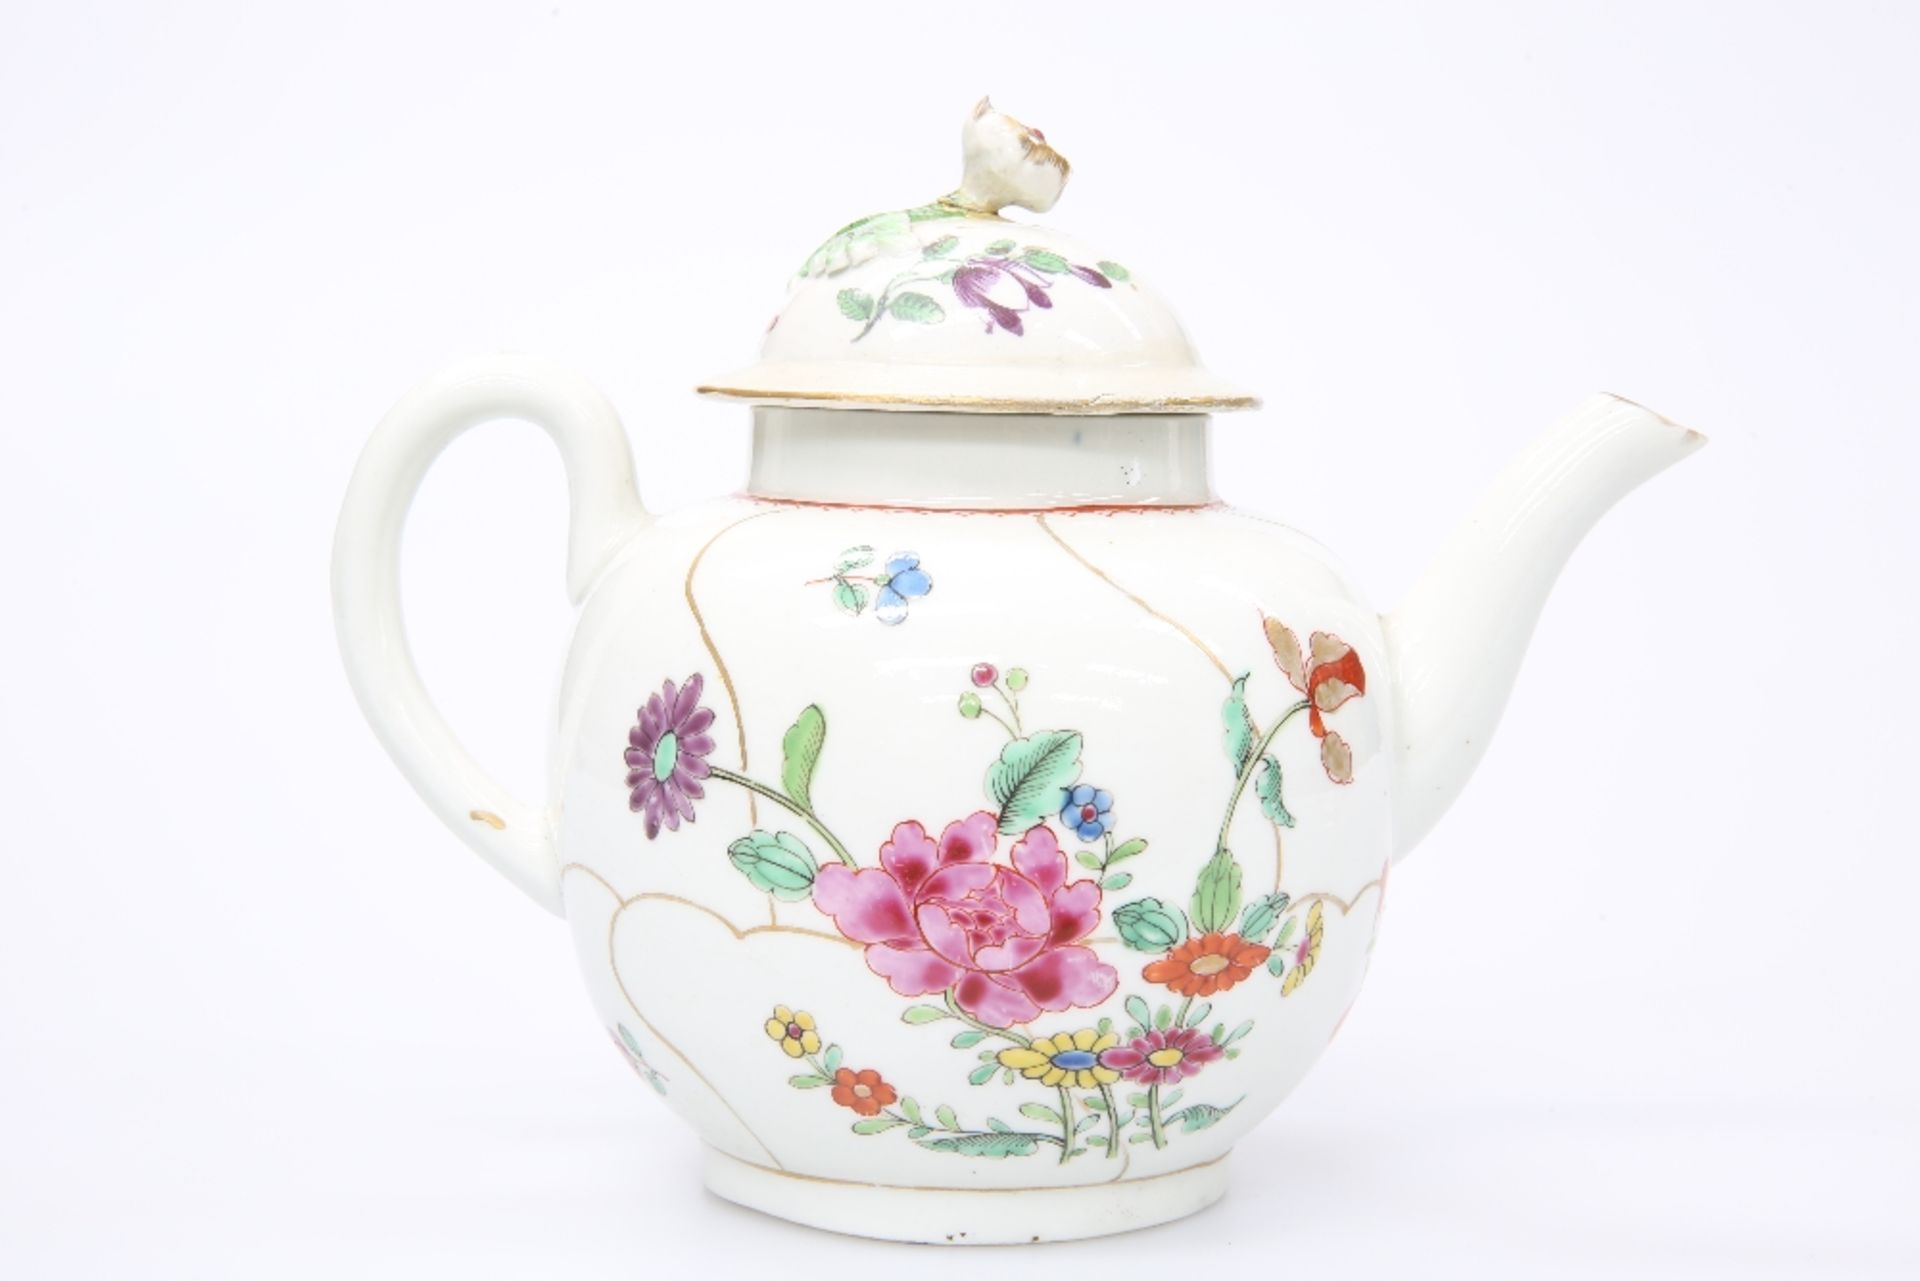 A CHINESE EXPORT PORCELAIN TEAPOT, LATE 18TH CENTURY